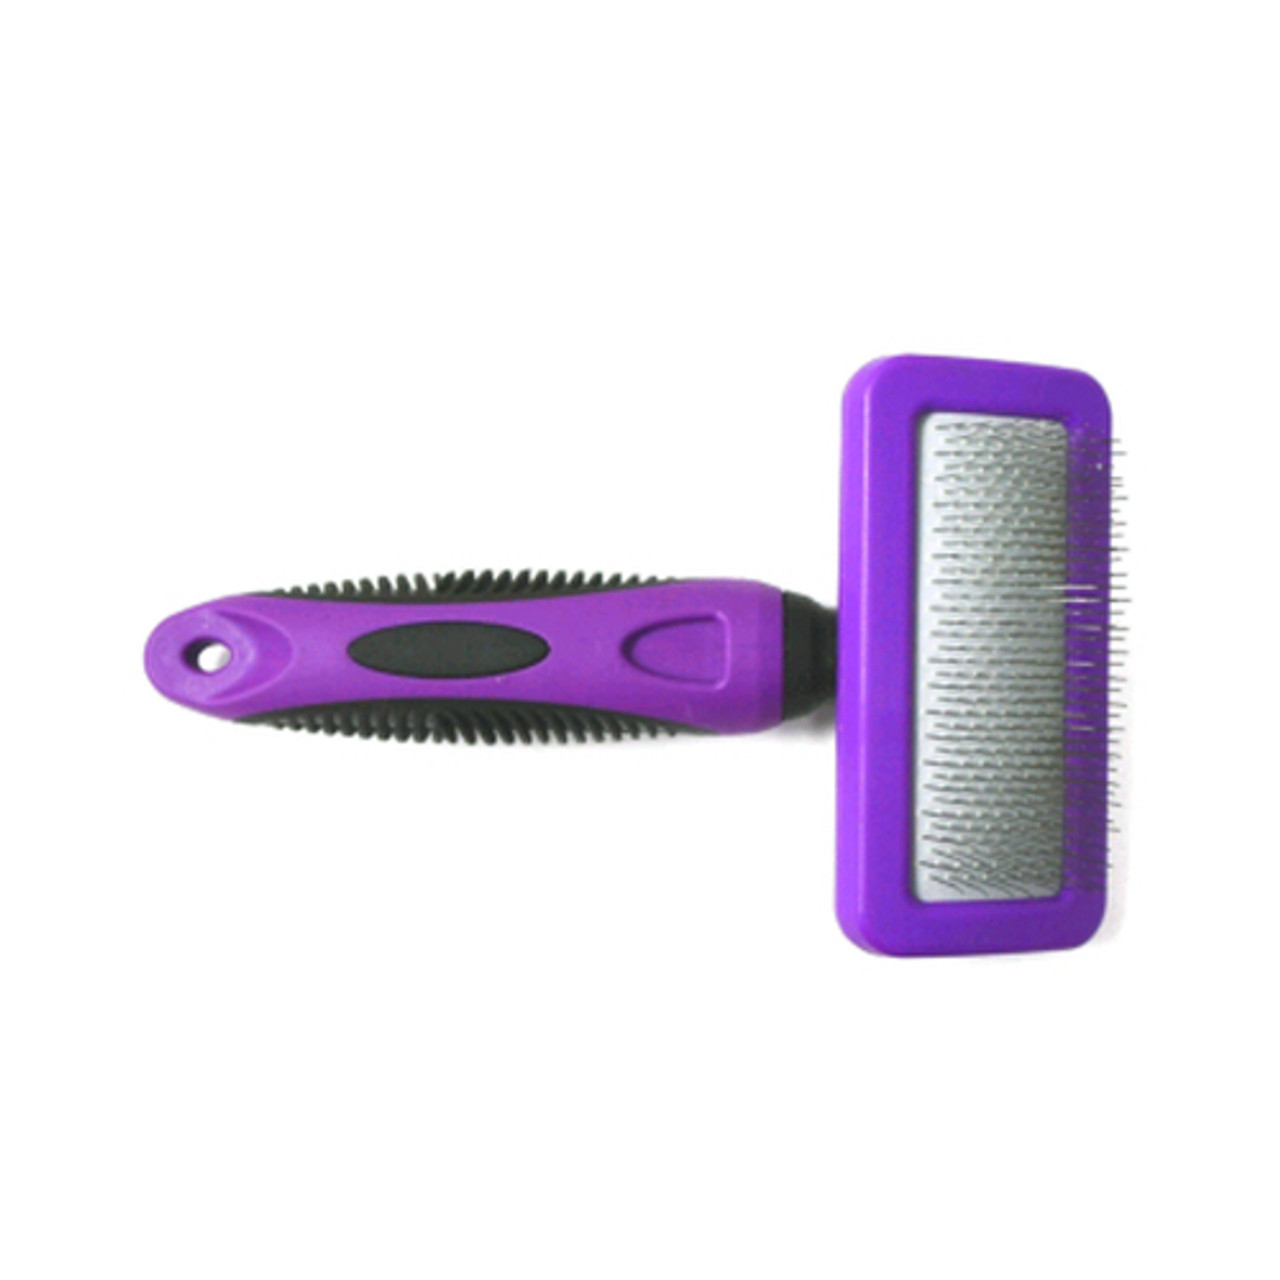 Flexible smaller brush tips, so easy to control, try writech sign brus